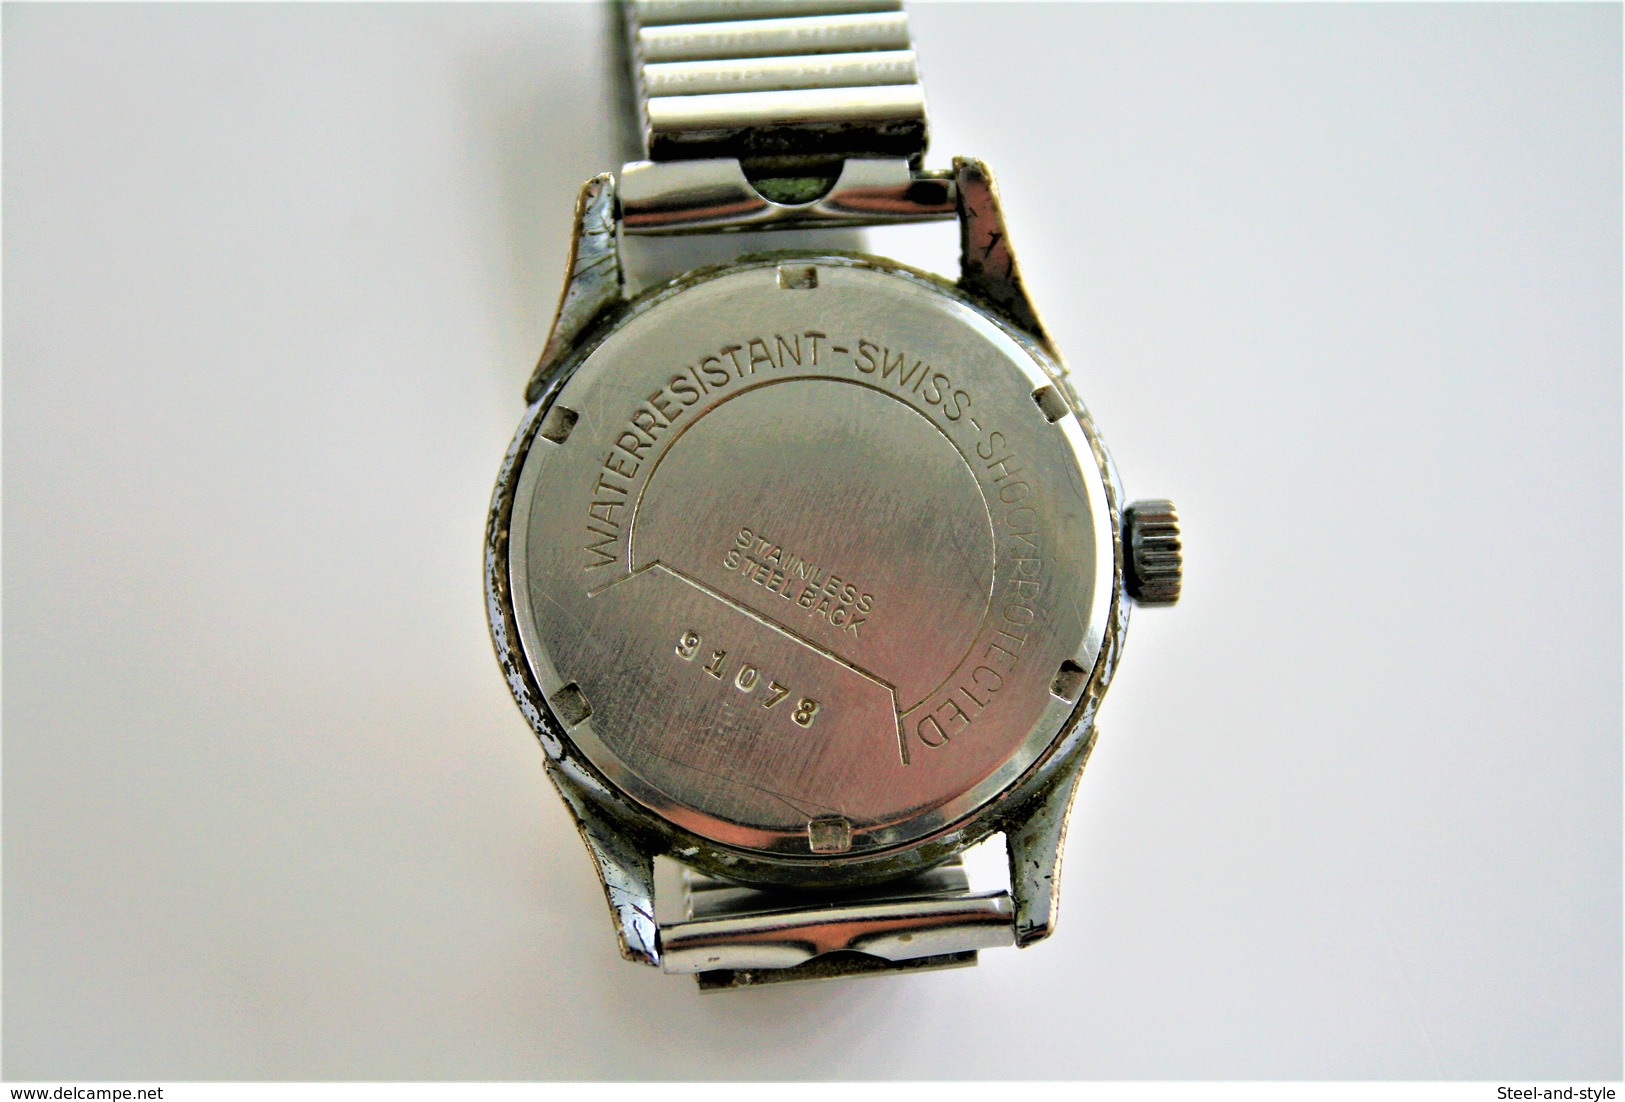 watches : PRONTO VERDAL TROPIC DAIL INCABLOC HAND WIND  WITH FIXOFLEX - original - running - worn condition dial damaged